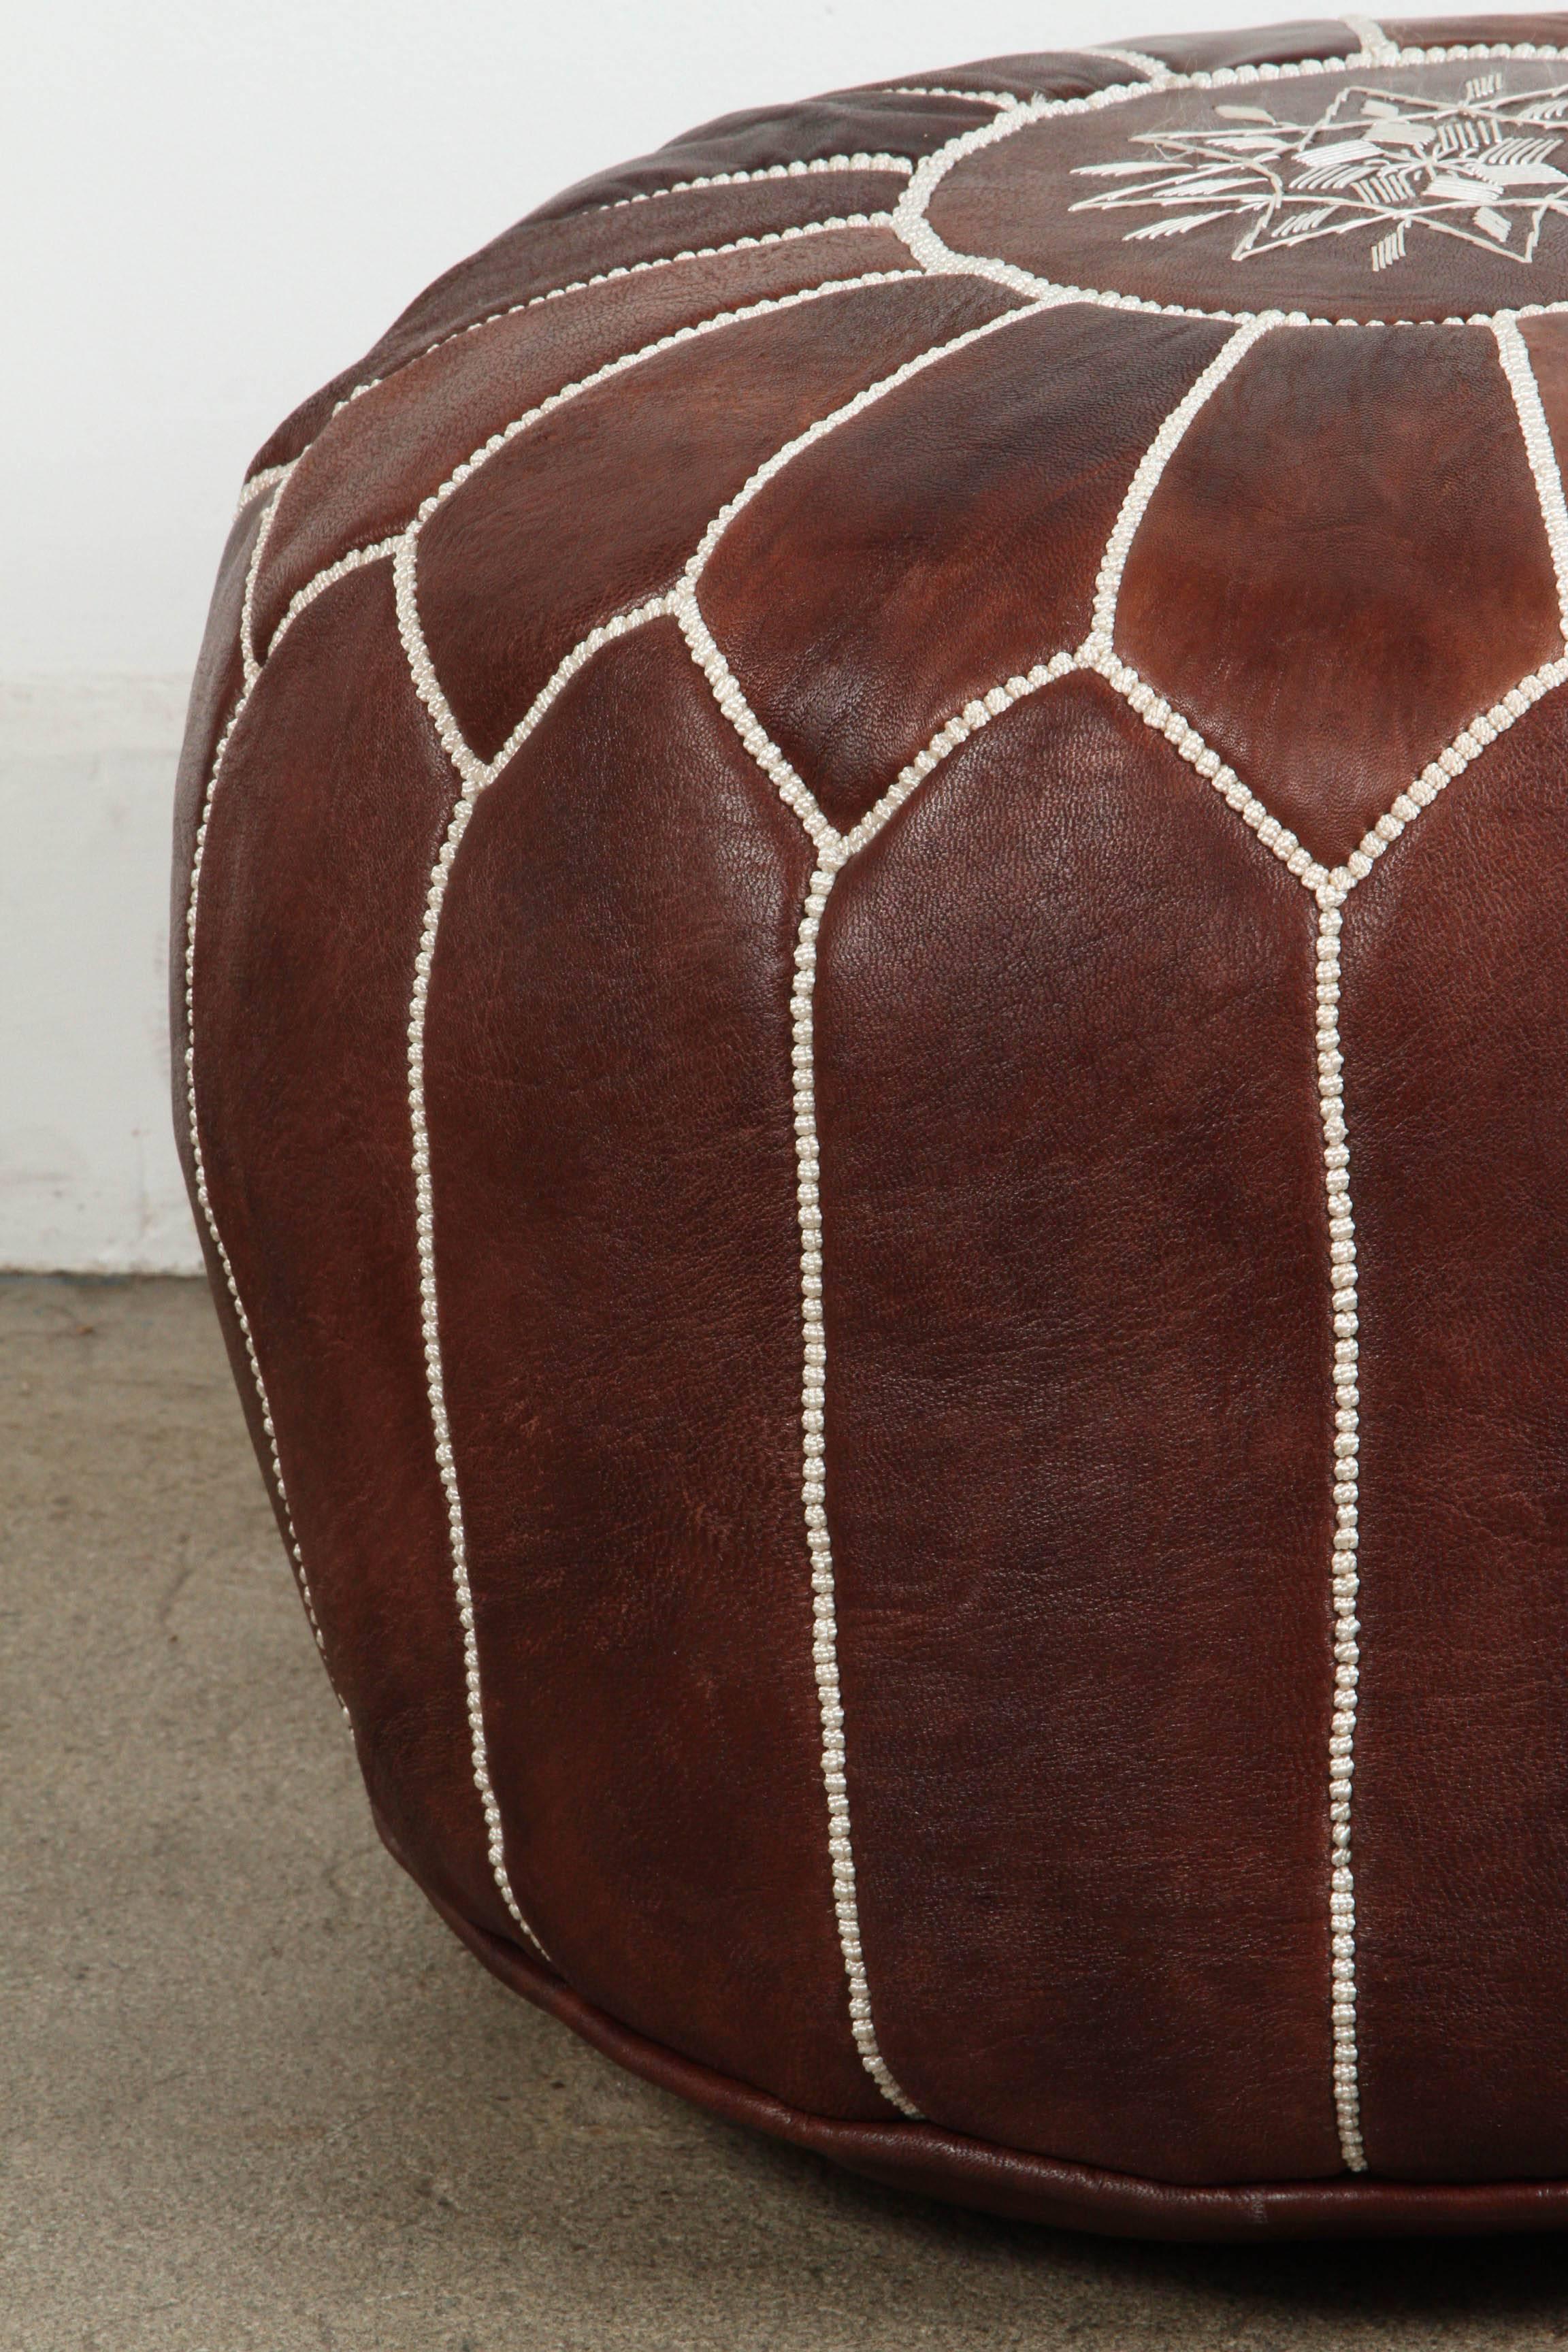 Moroccan handcrafted brown leather ottoman, with embroideries.
Could be used as a stool, side table or ottoman.
The Moroccan leather poufs are hand-tooled and embroidered with white thread.
Very nice handmade Moroccan dark brown color leather